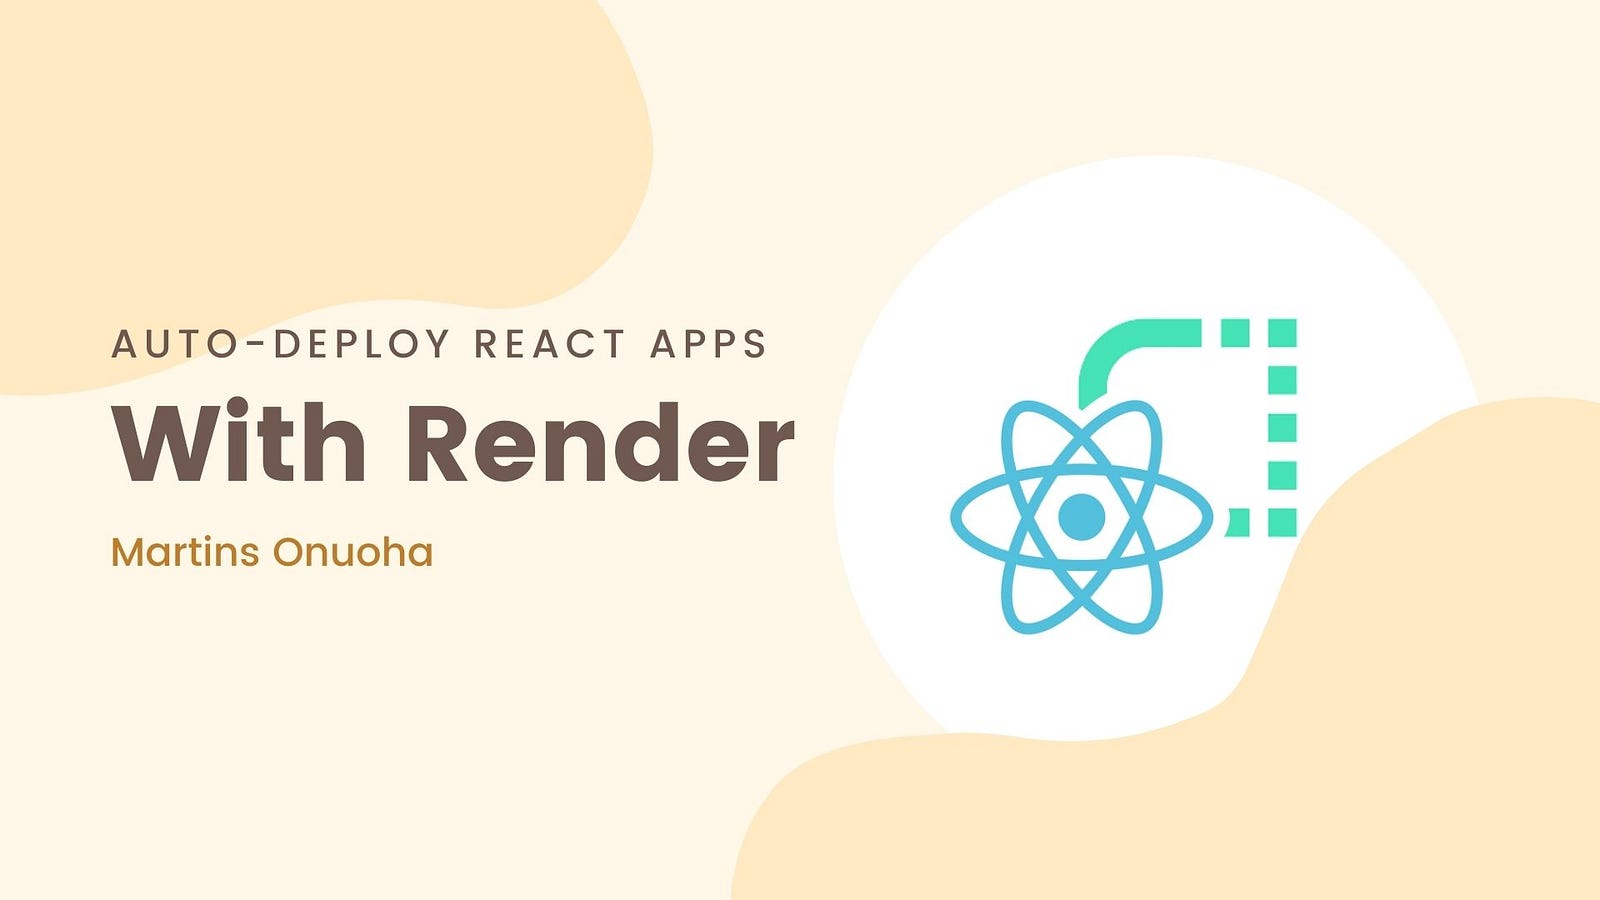 Auto-Deploy React Apps With Render